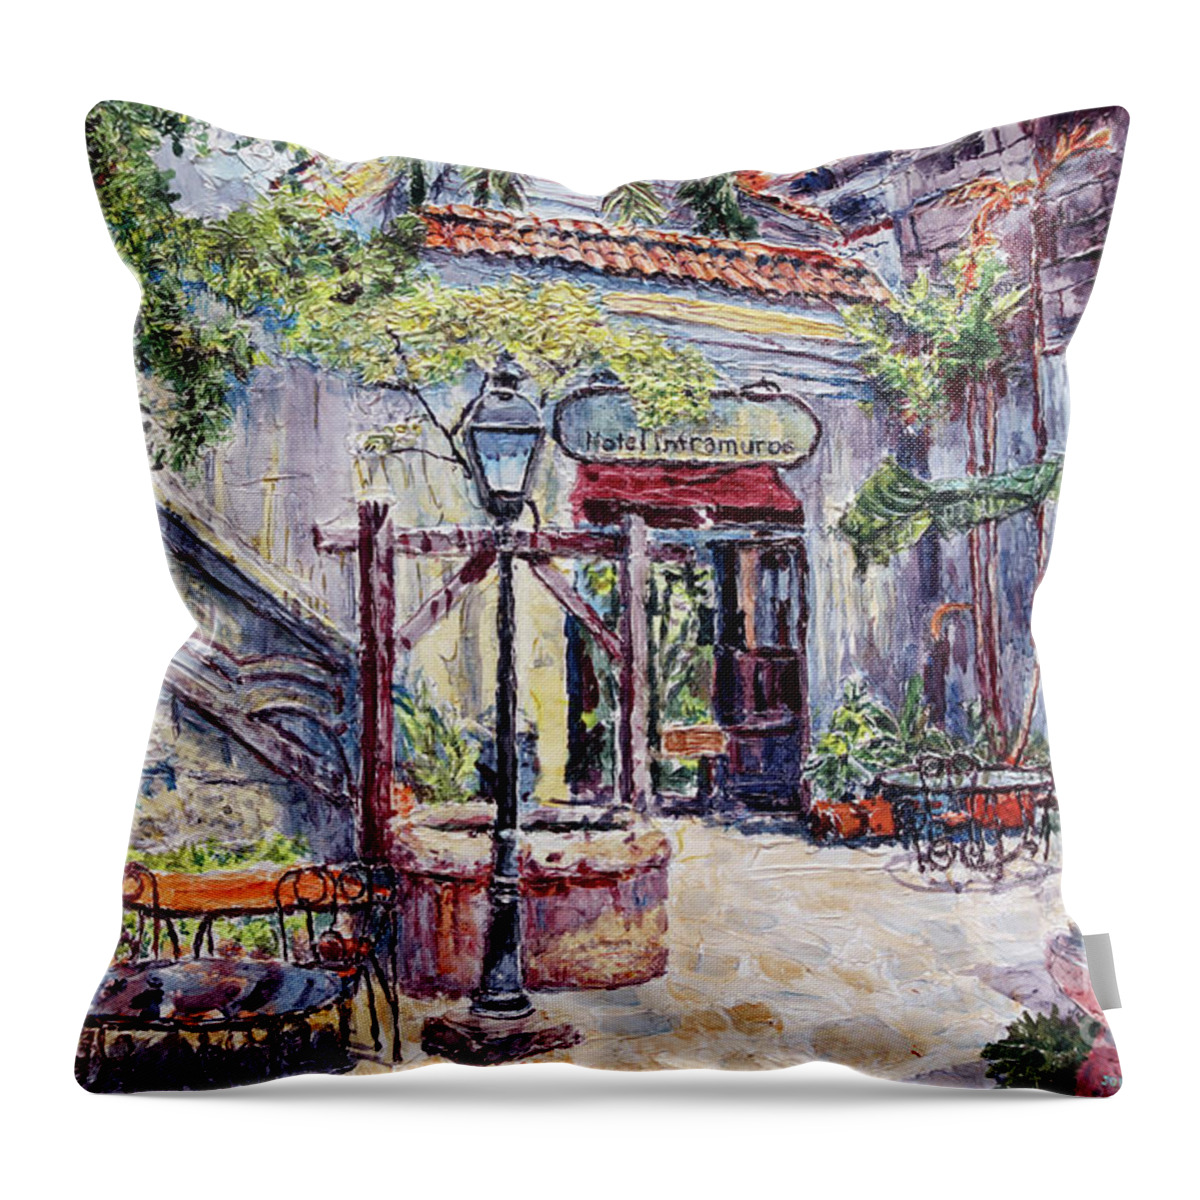 Barbara's Cafe Throw Pillow featuring the painting Cafe by the Hotel, Intramuros, Manila by Joey Agbayani